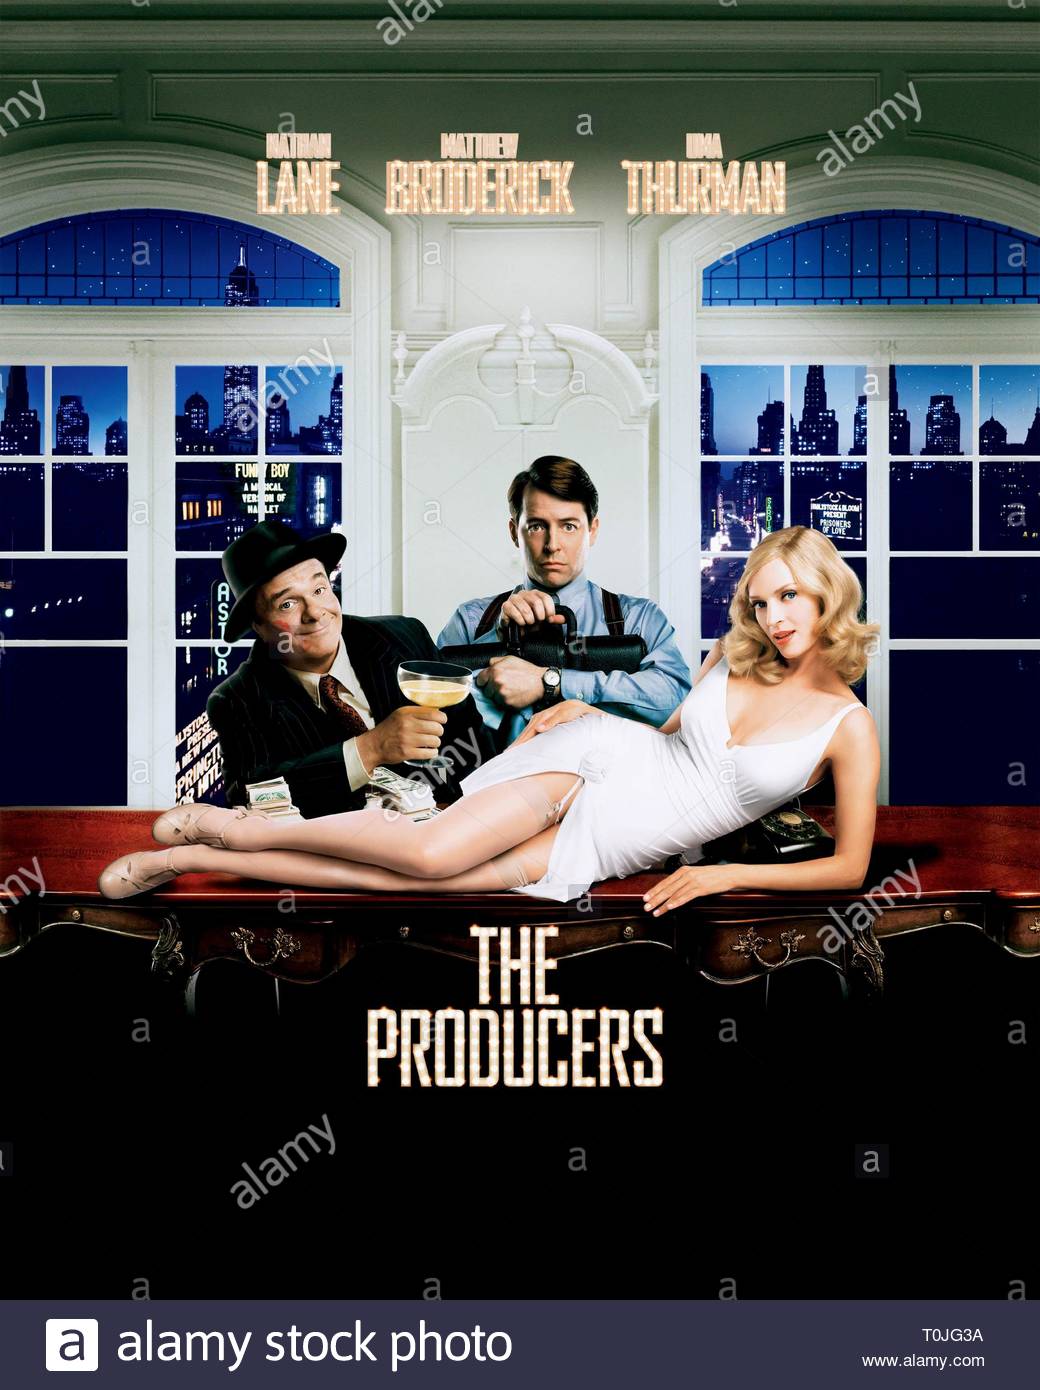 The Producers Main Poster